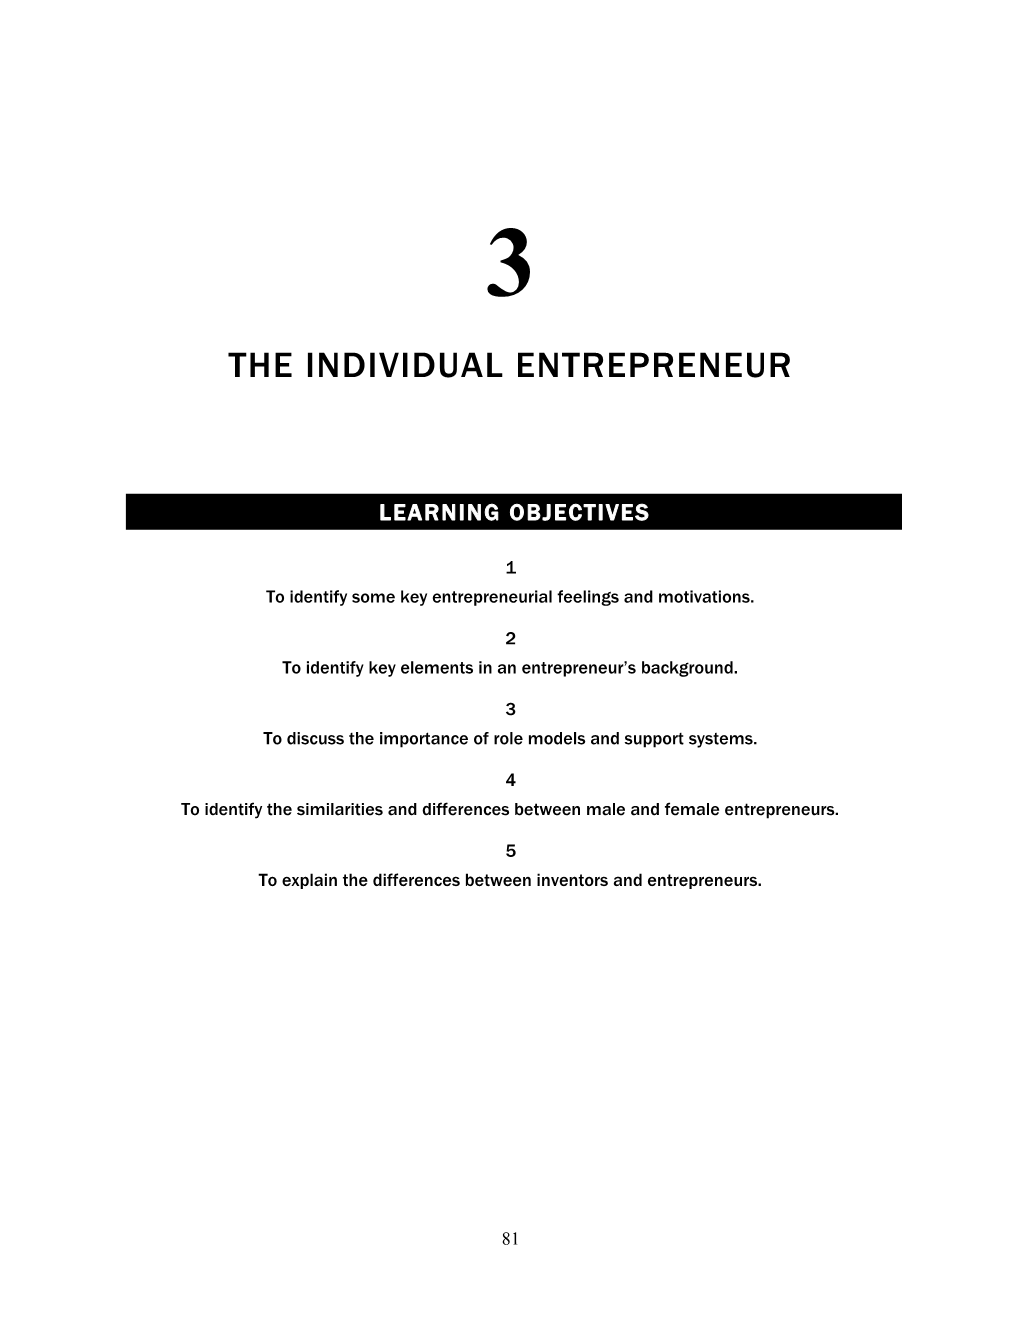 To Identify Some Key Entrepreneurial Feelings and Motivations